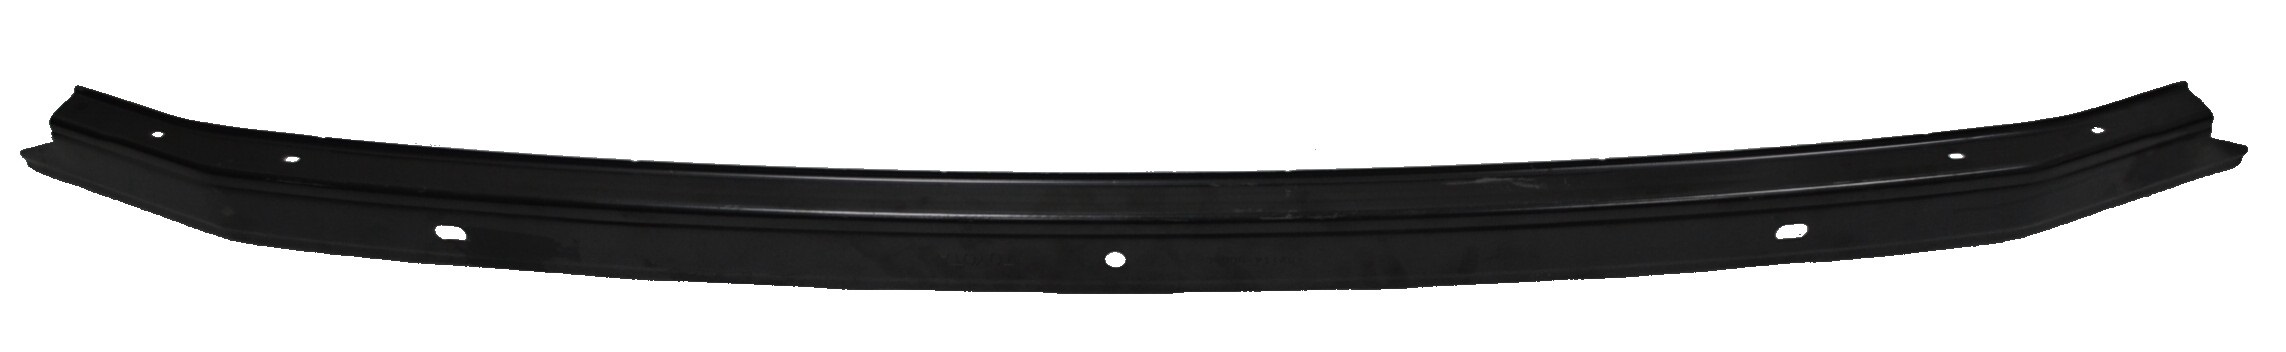 TUNDRA 14-17 Front Cover STIFFENER EXT Bracket STEL